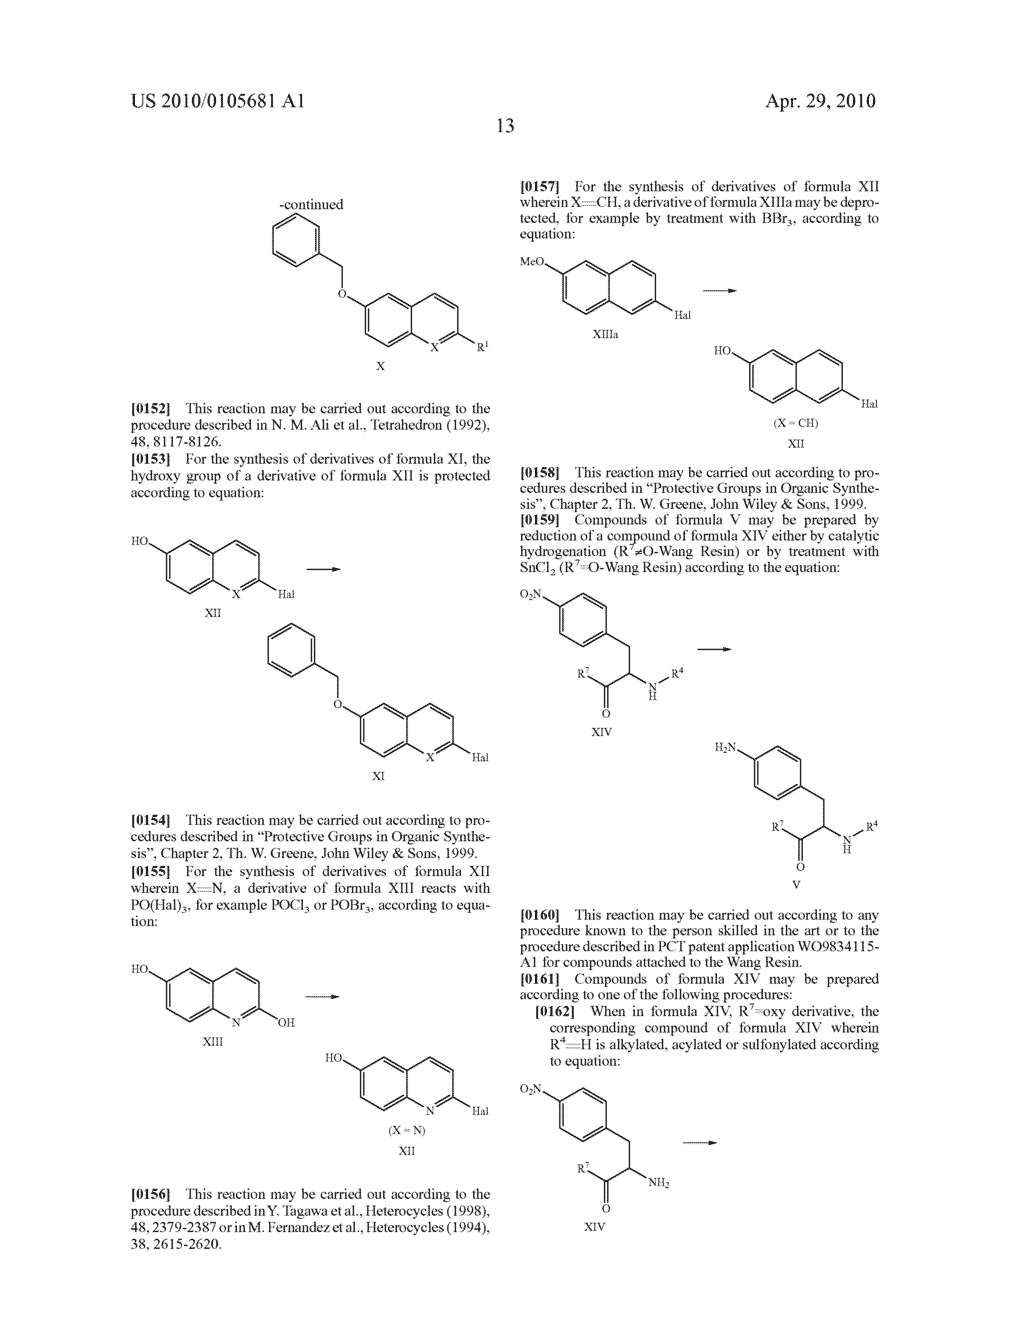 2,6-QUINOLINYL AND 2,6-NAPHTHYL DERIVATIVES, PROCESSES FOR PREPARING THEM AND THEIR USES AS VLA-4 INHIBITORS - diagram, schematic, and image 14